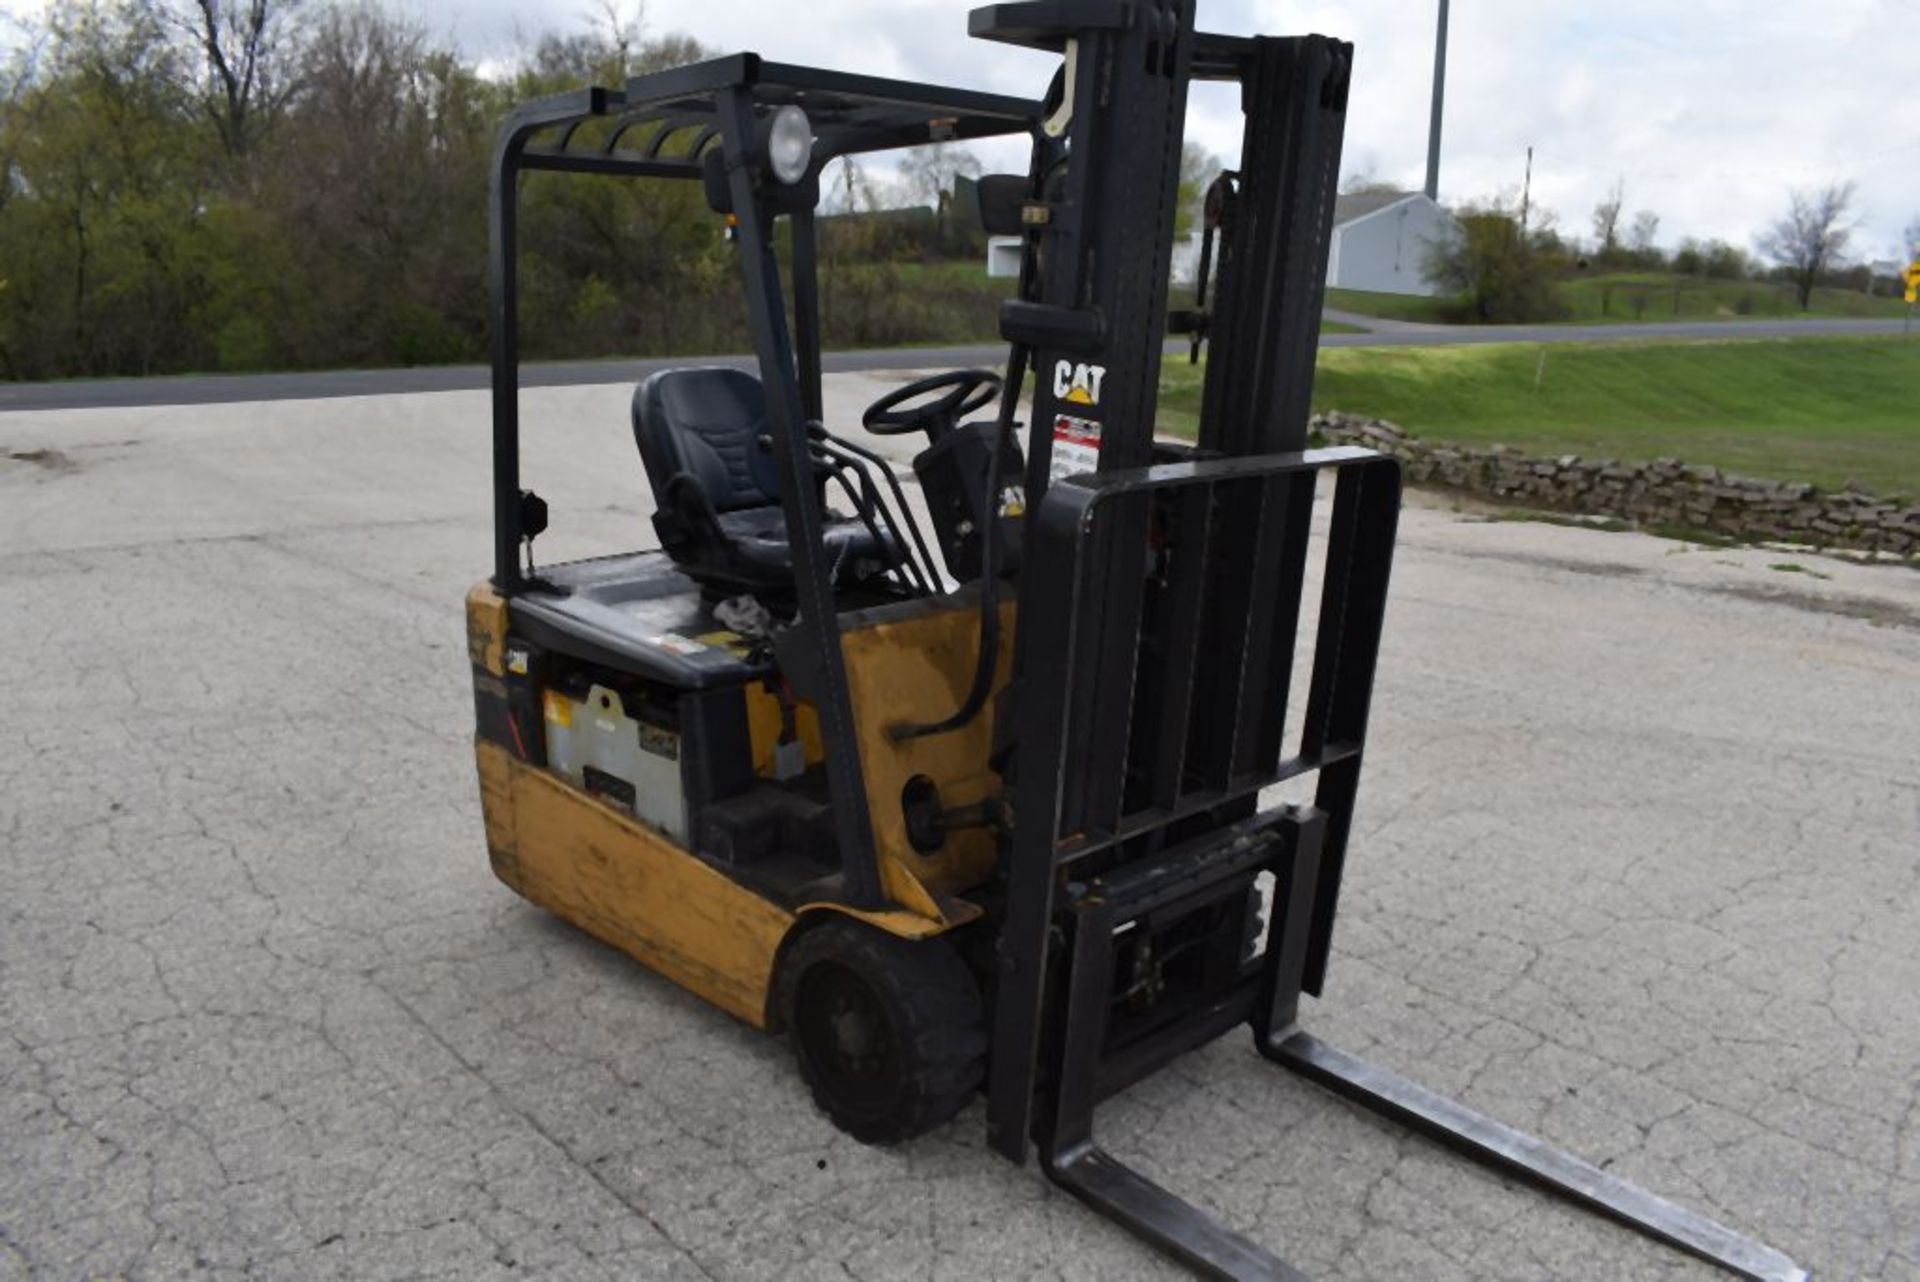 CATERPILLAR RIDE ON FORK TRUCK, MODEL ET3500-AC, S/N: ETB1400111, 36V ELECTRIC TYPE WITH CHARGER, - Image 4 of 8